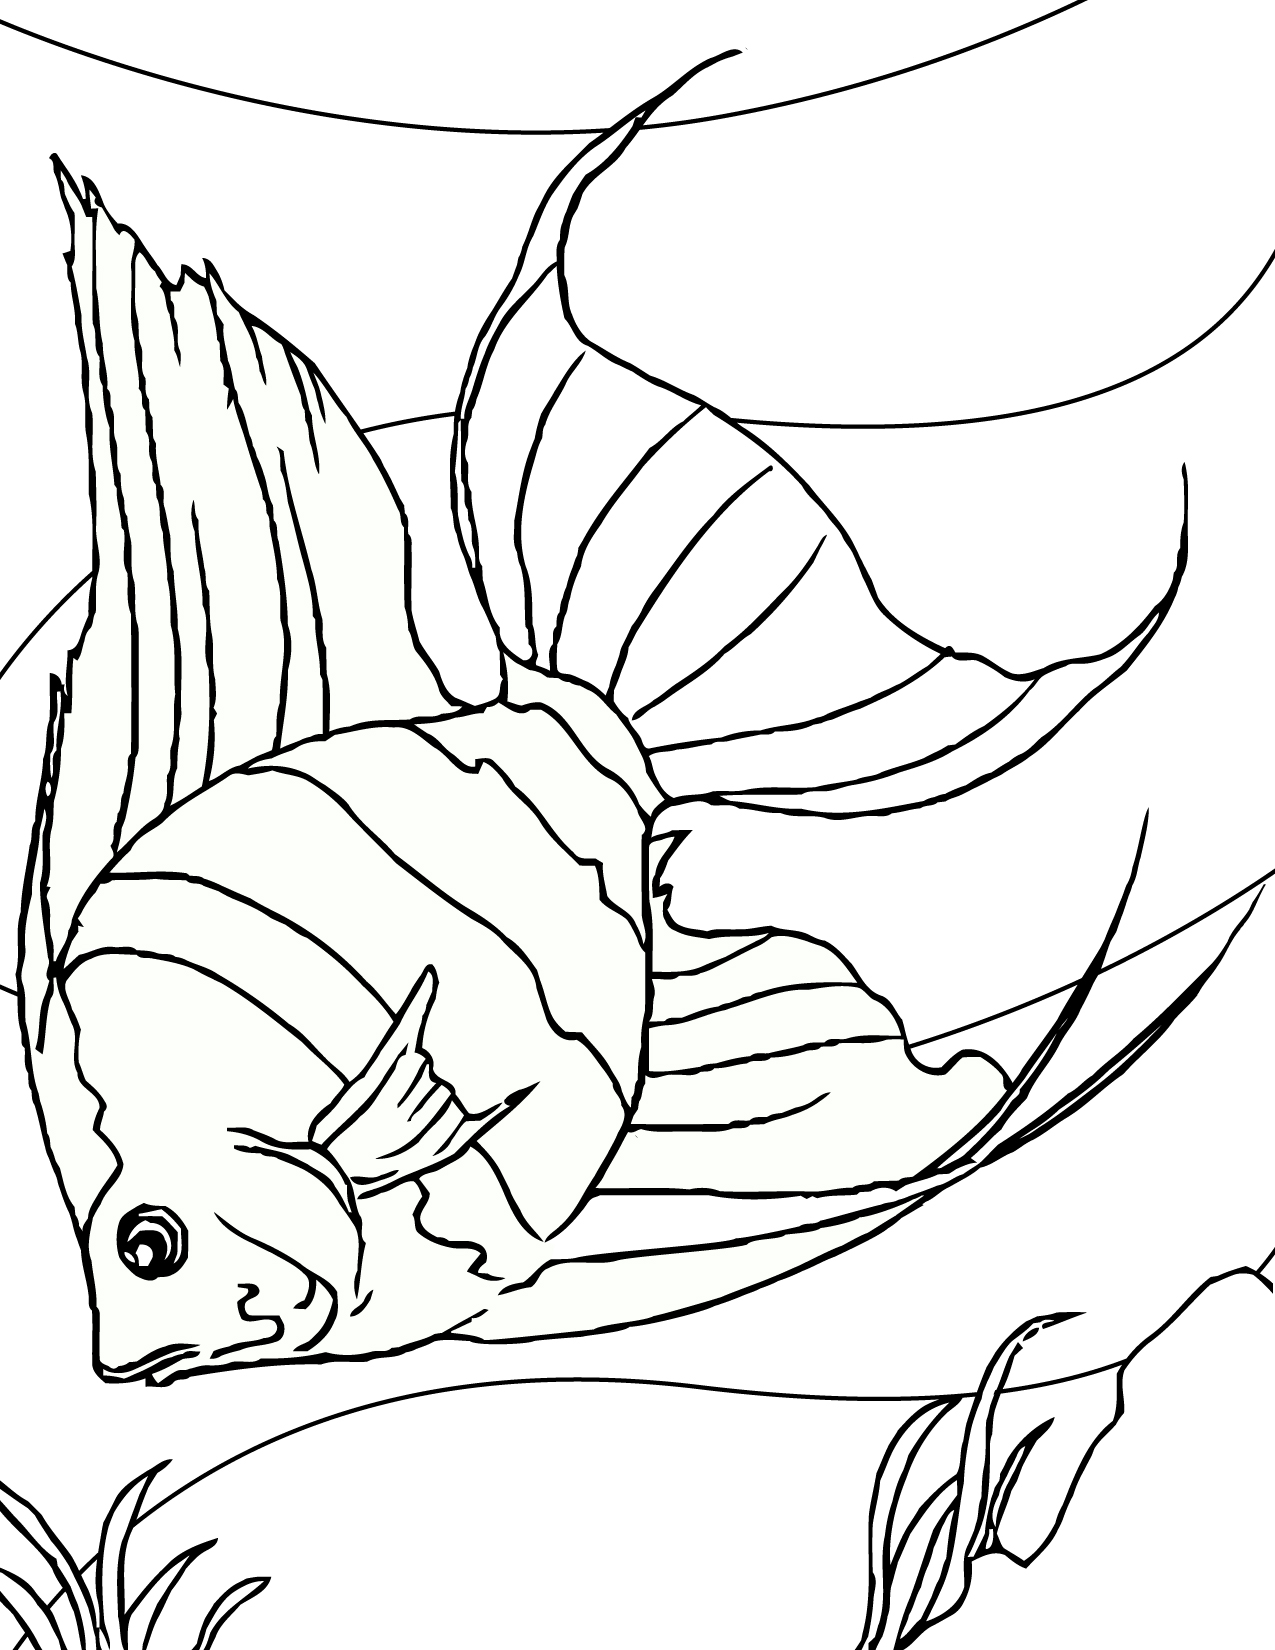 indi-fishes-coloring-pages-for-kids